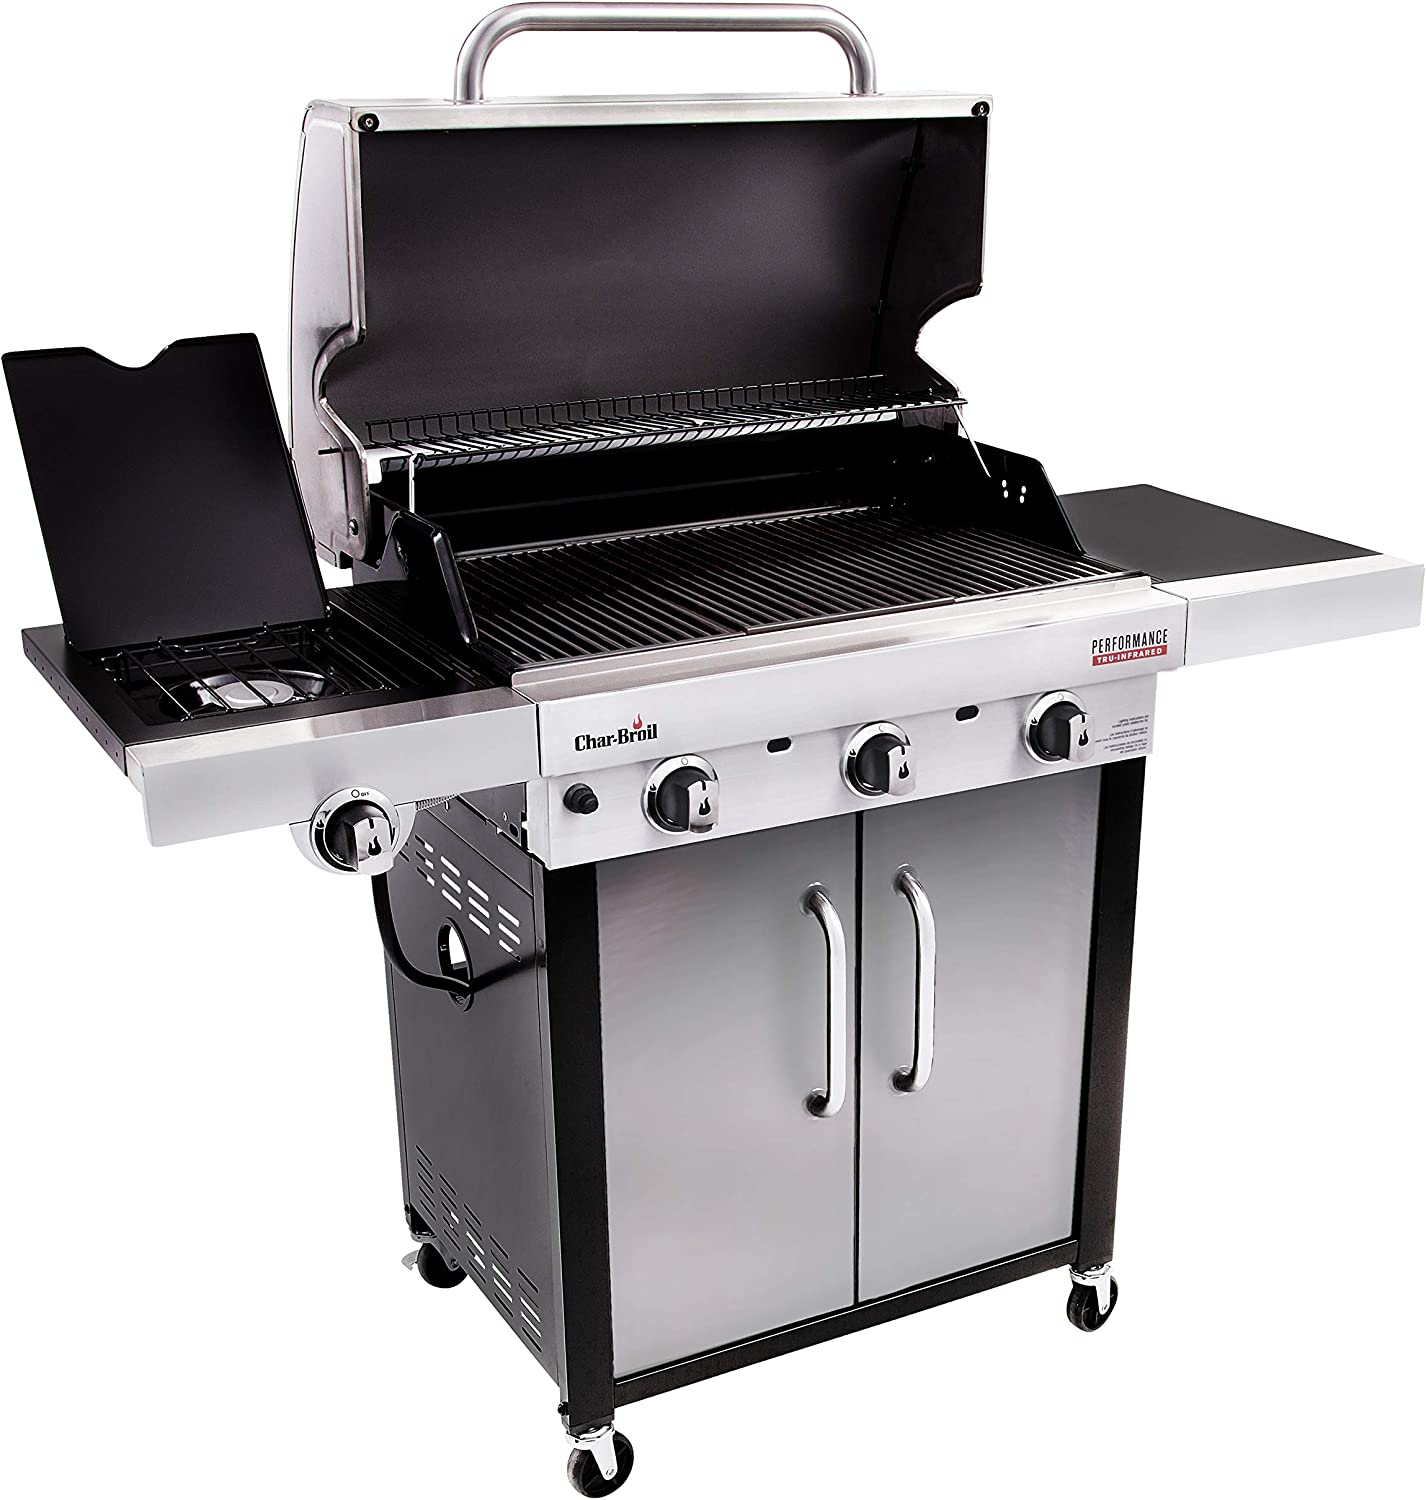 Char-Broil Performance Series™ TRU-Infrared™ 3-Burner Gas Grill - image 4 of 6